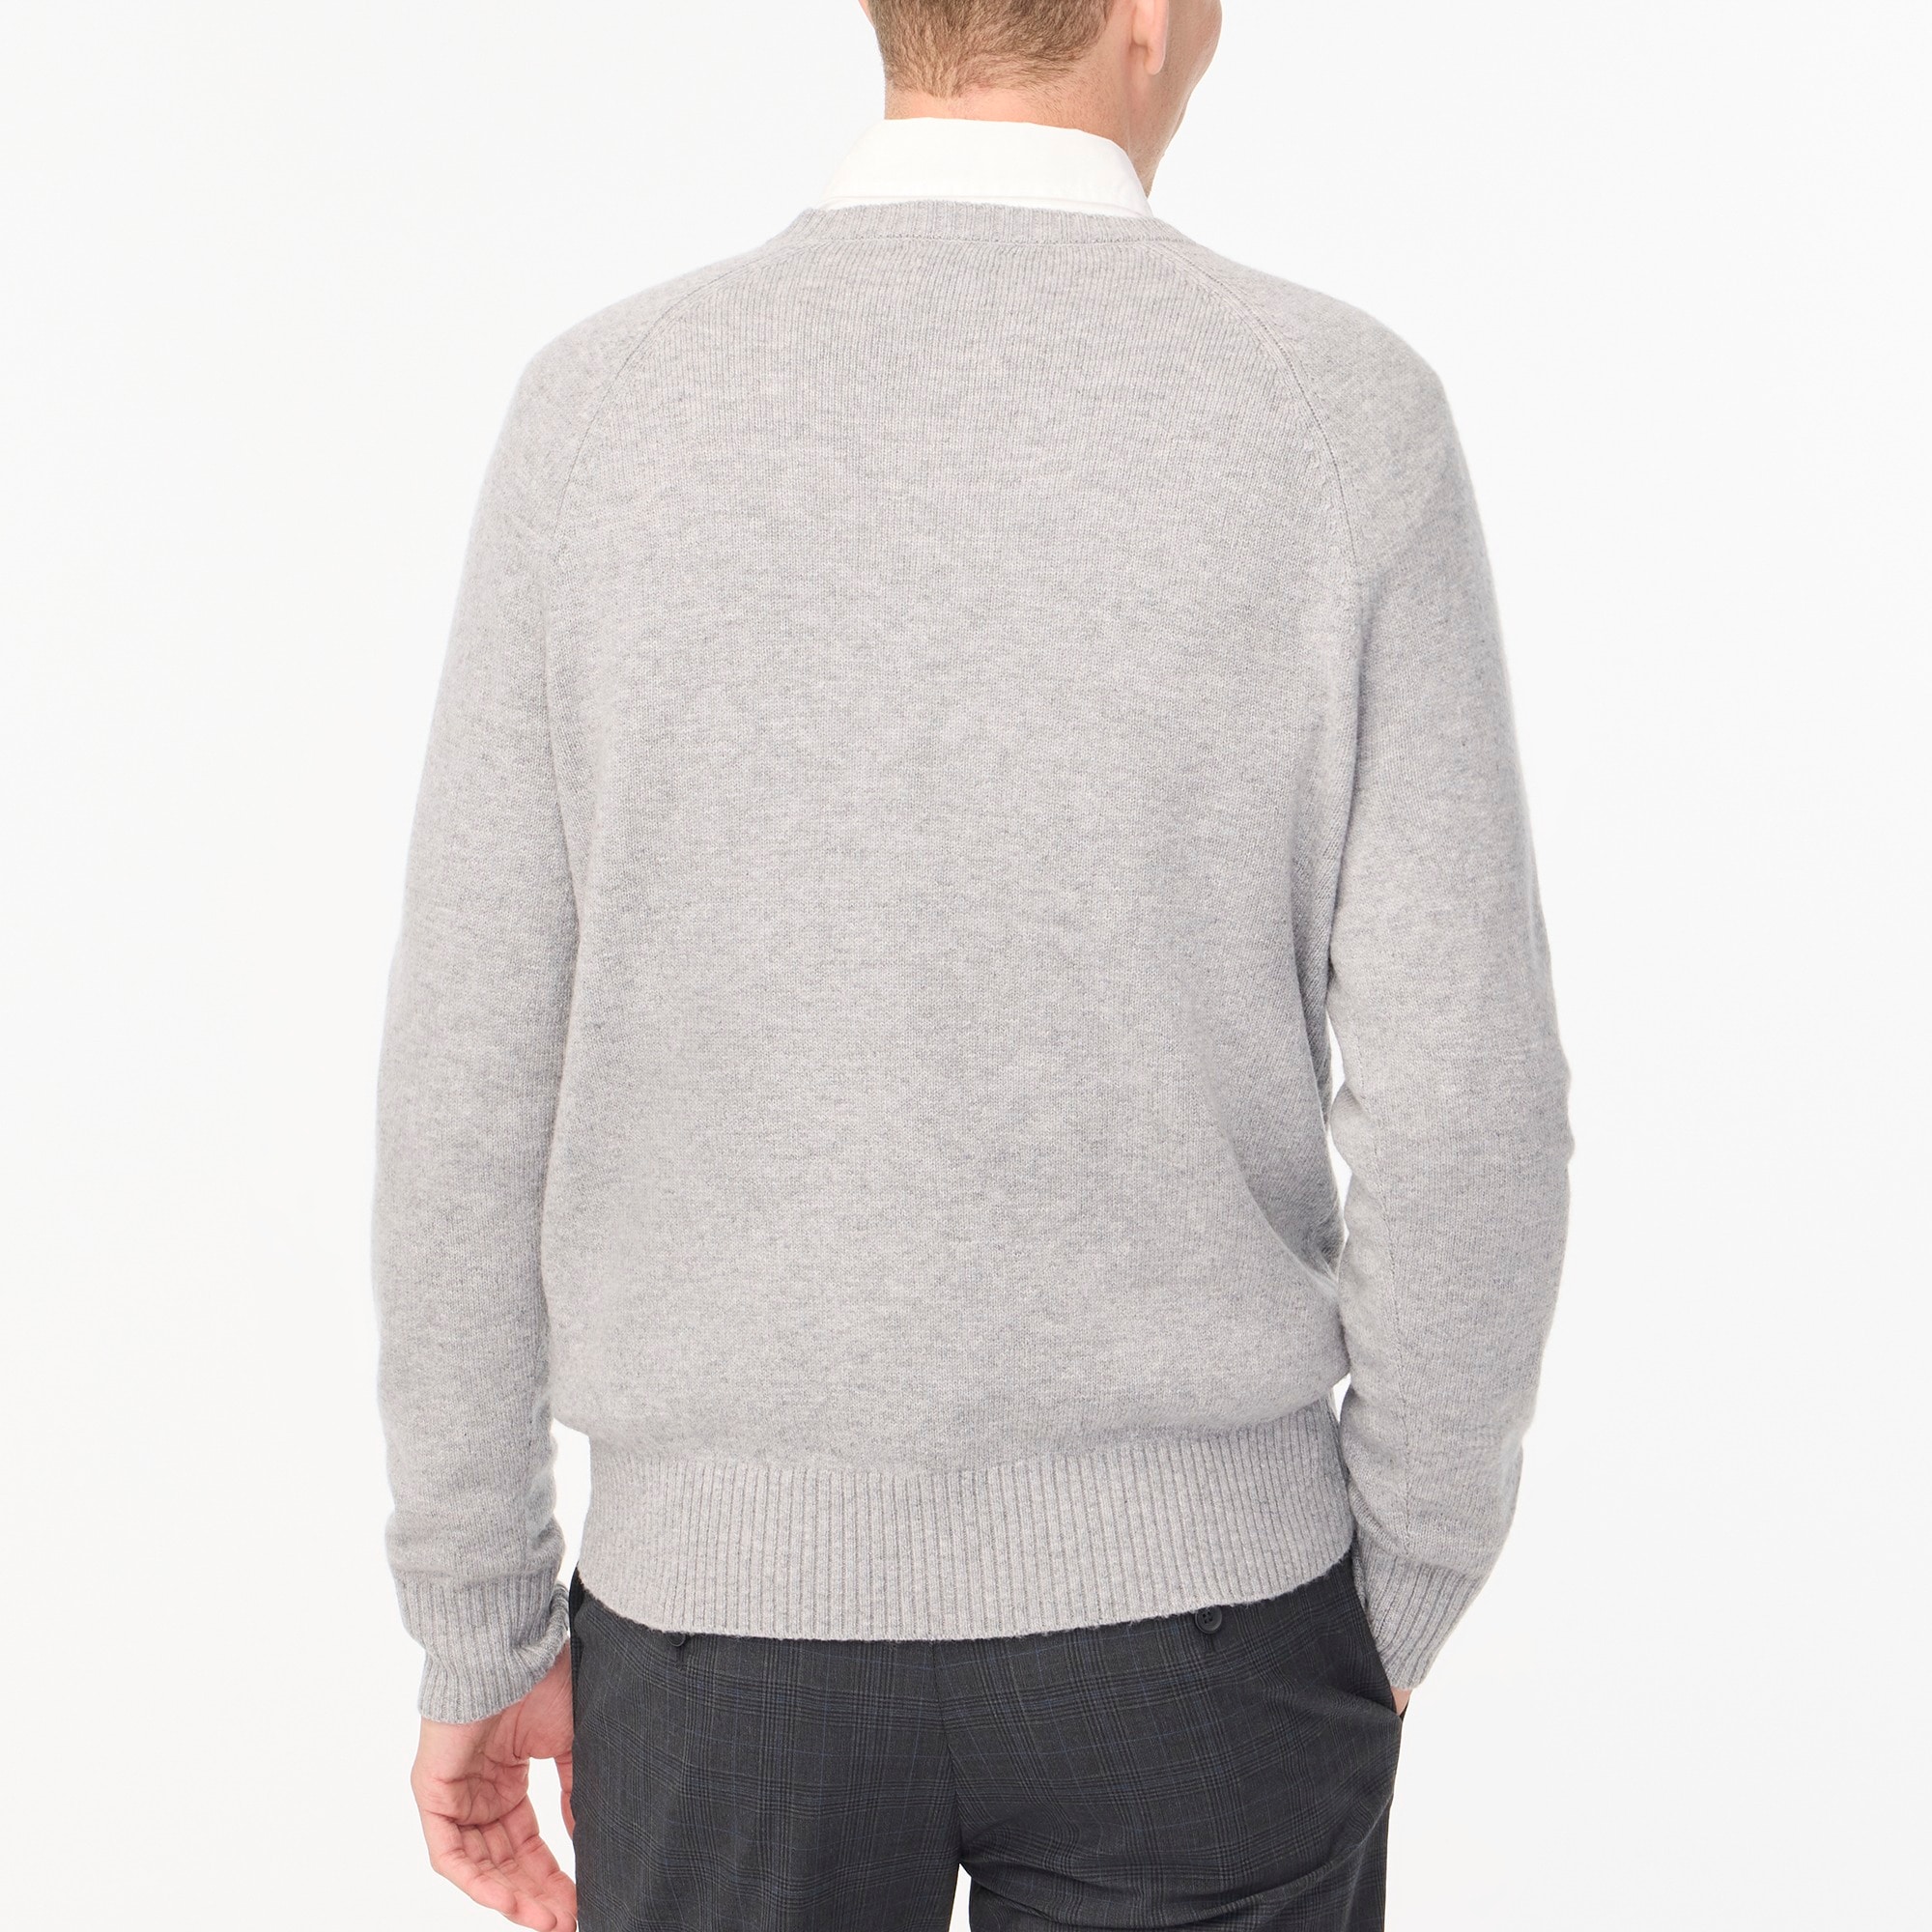 Crewneck sweater supersoft lambswool blend